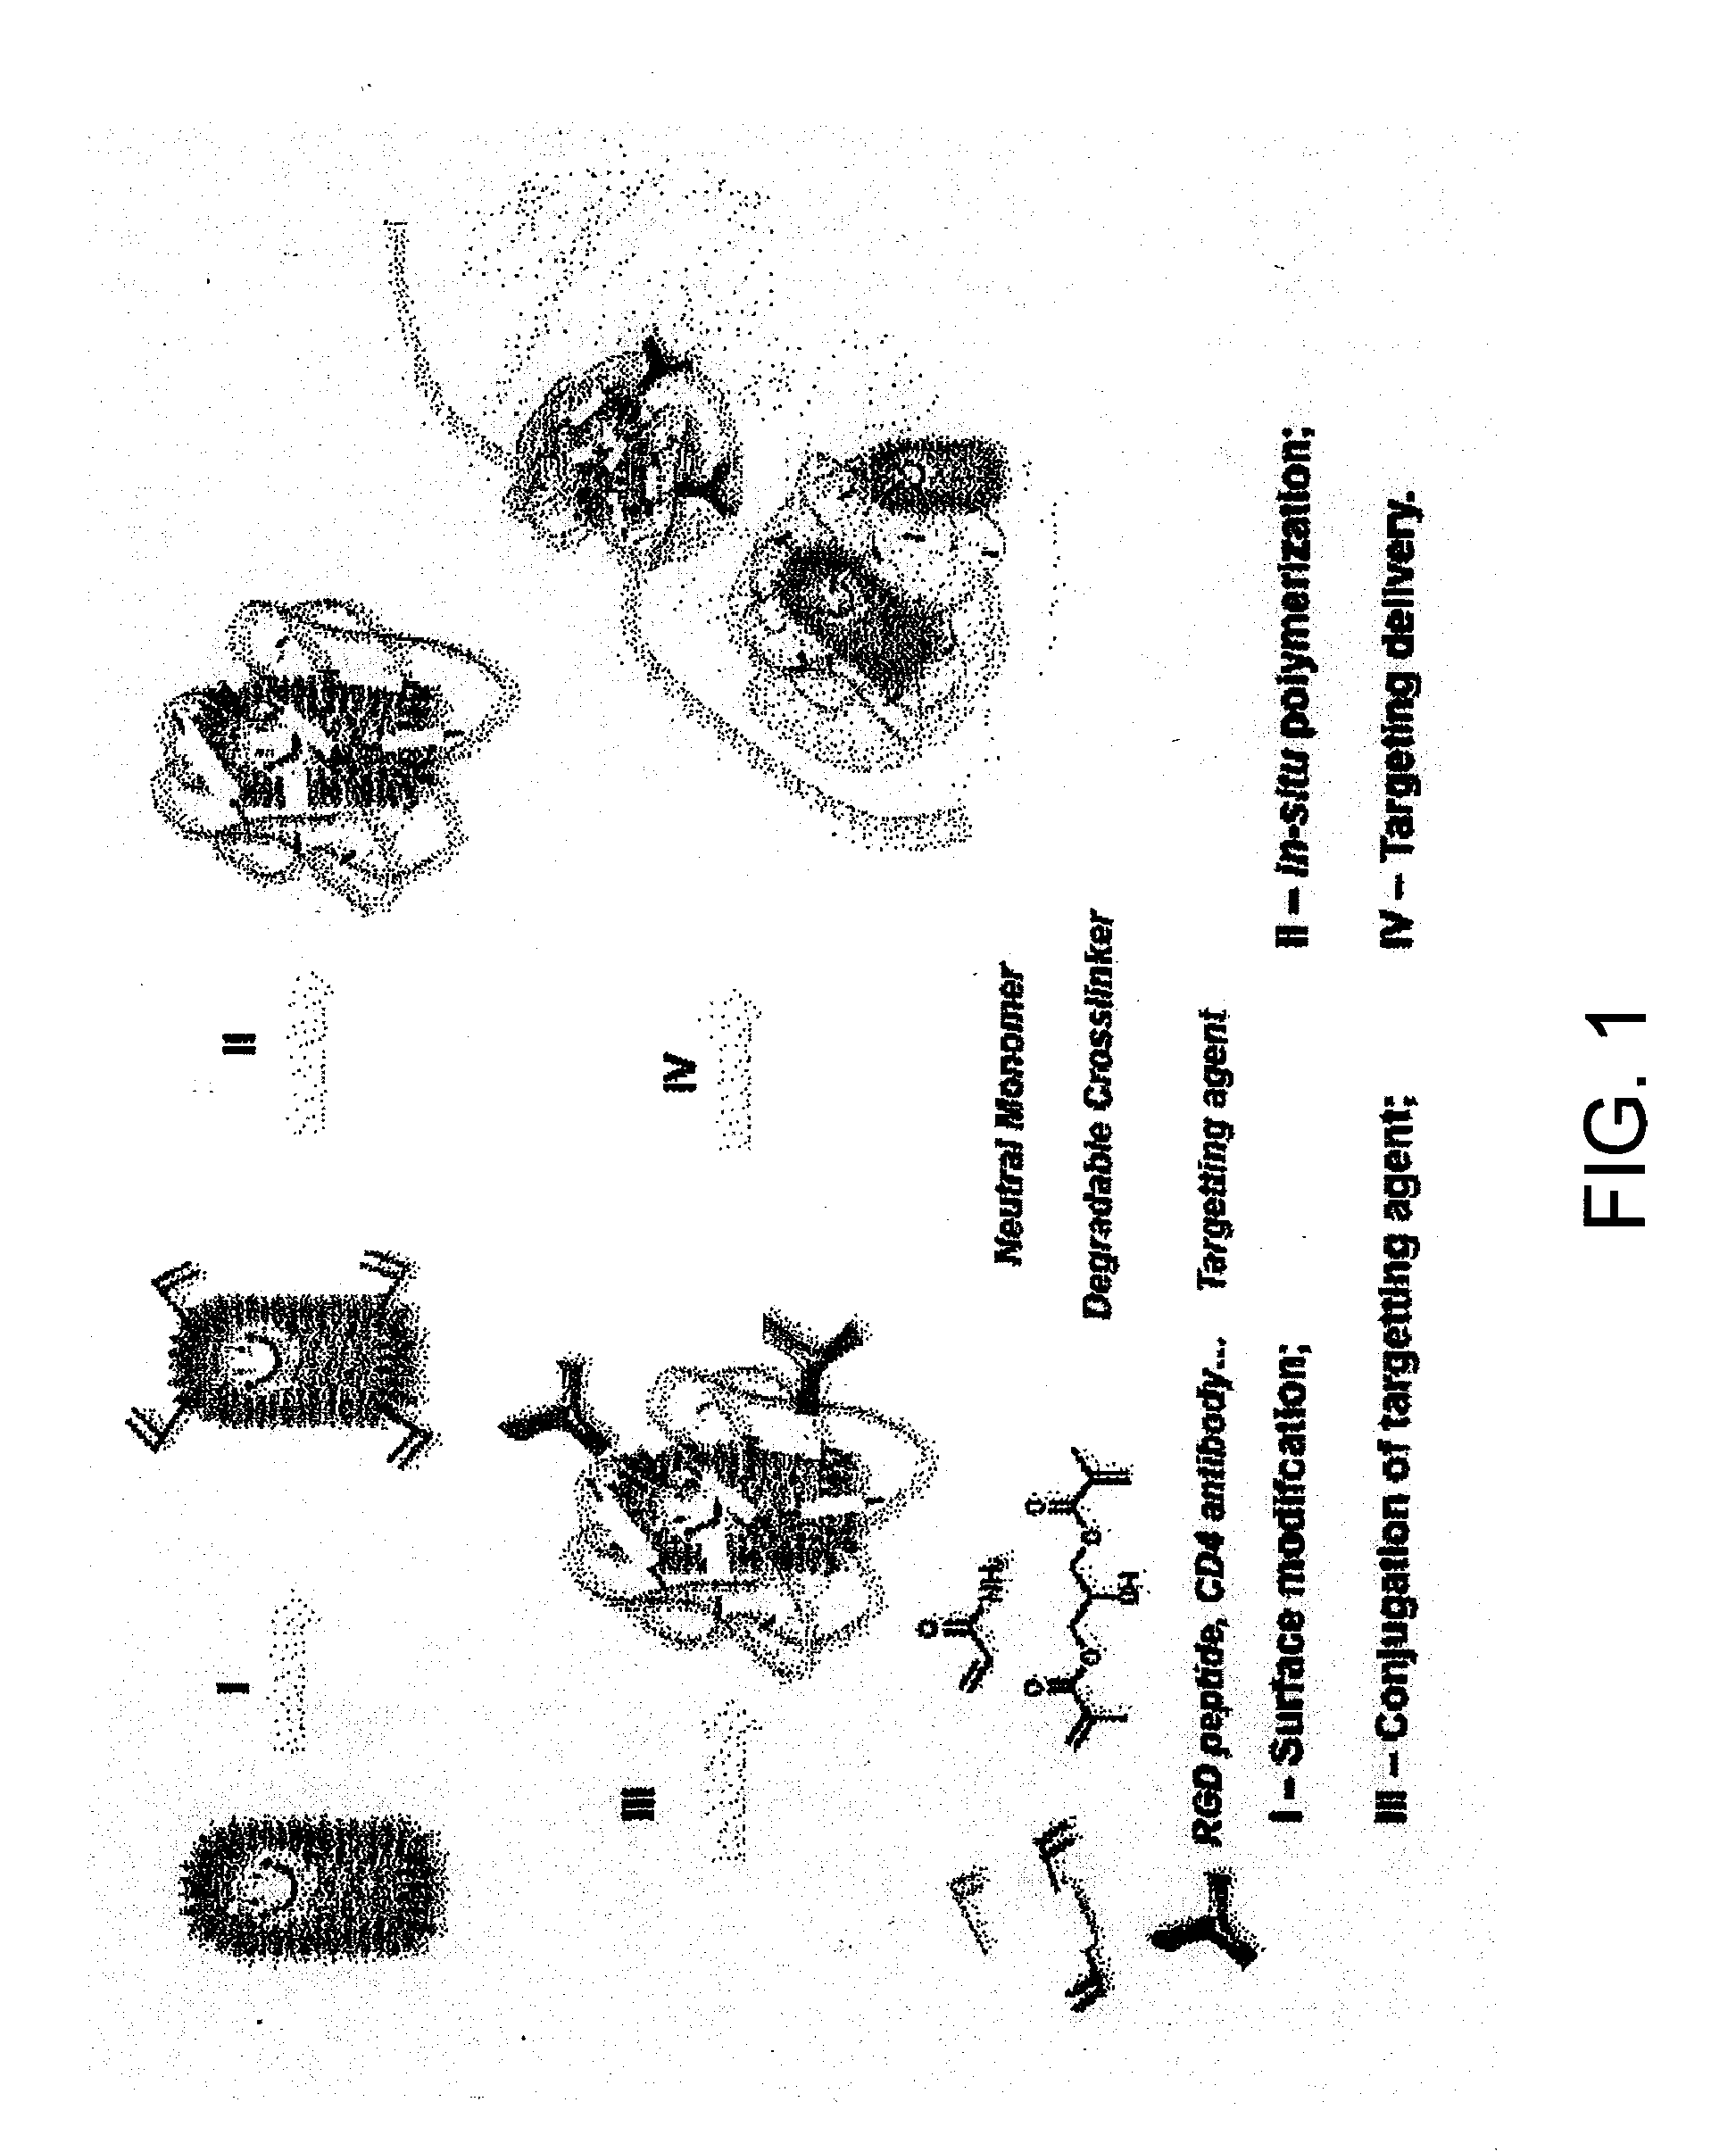 Viral vector nanocapsule for targeting gene therapy and its preparation